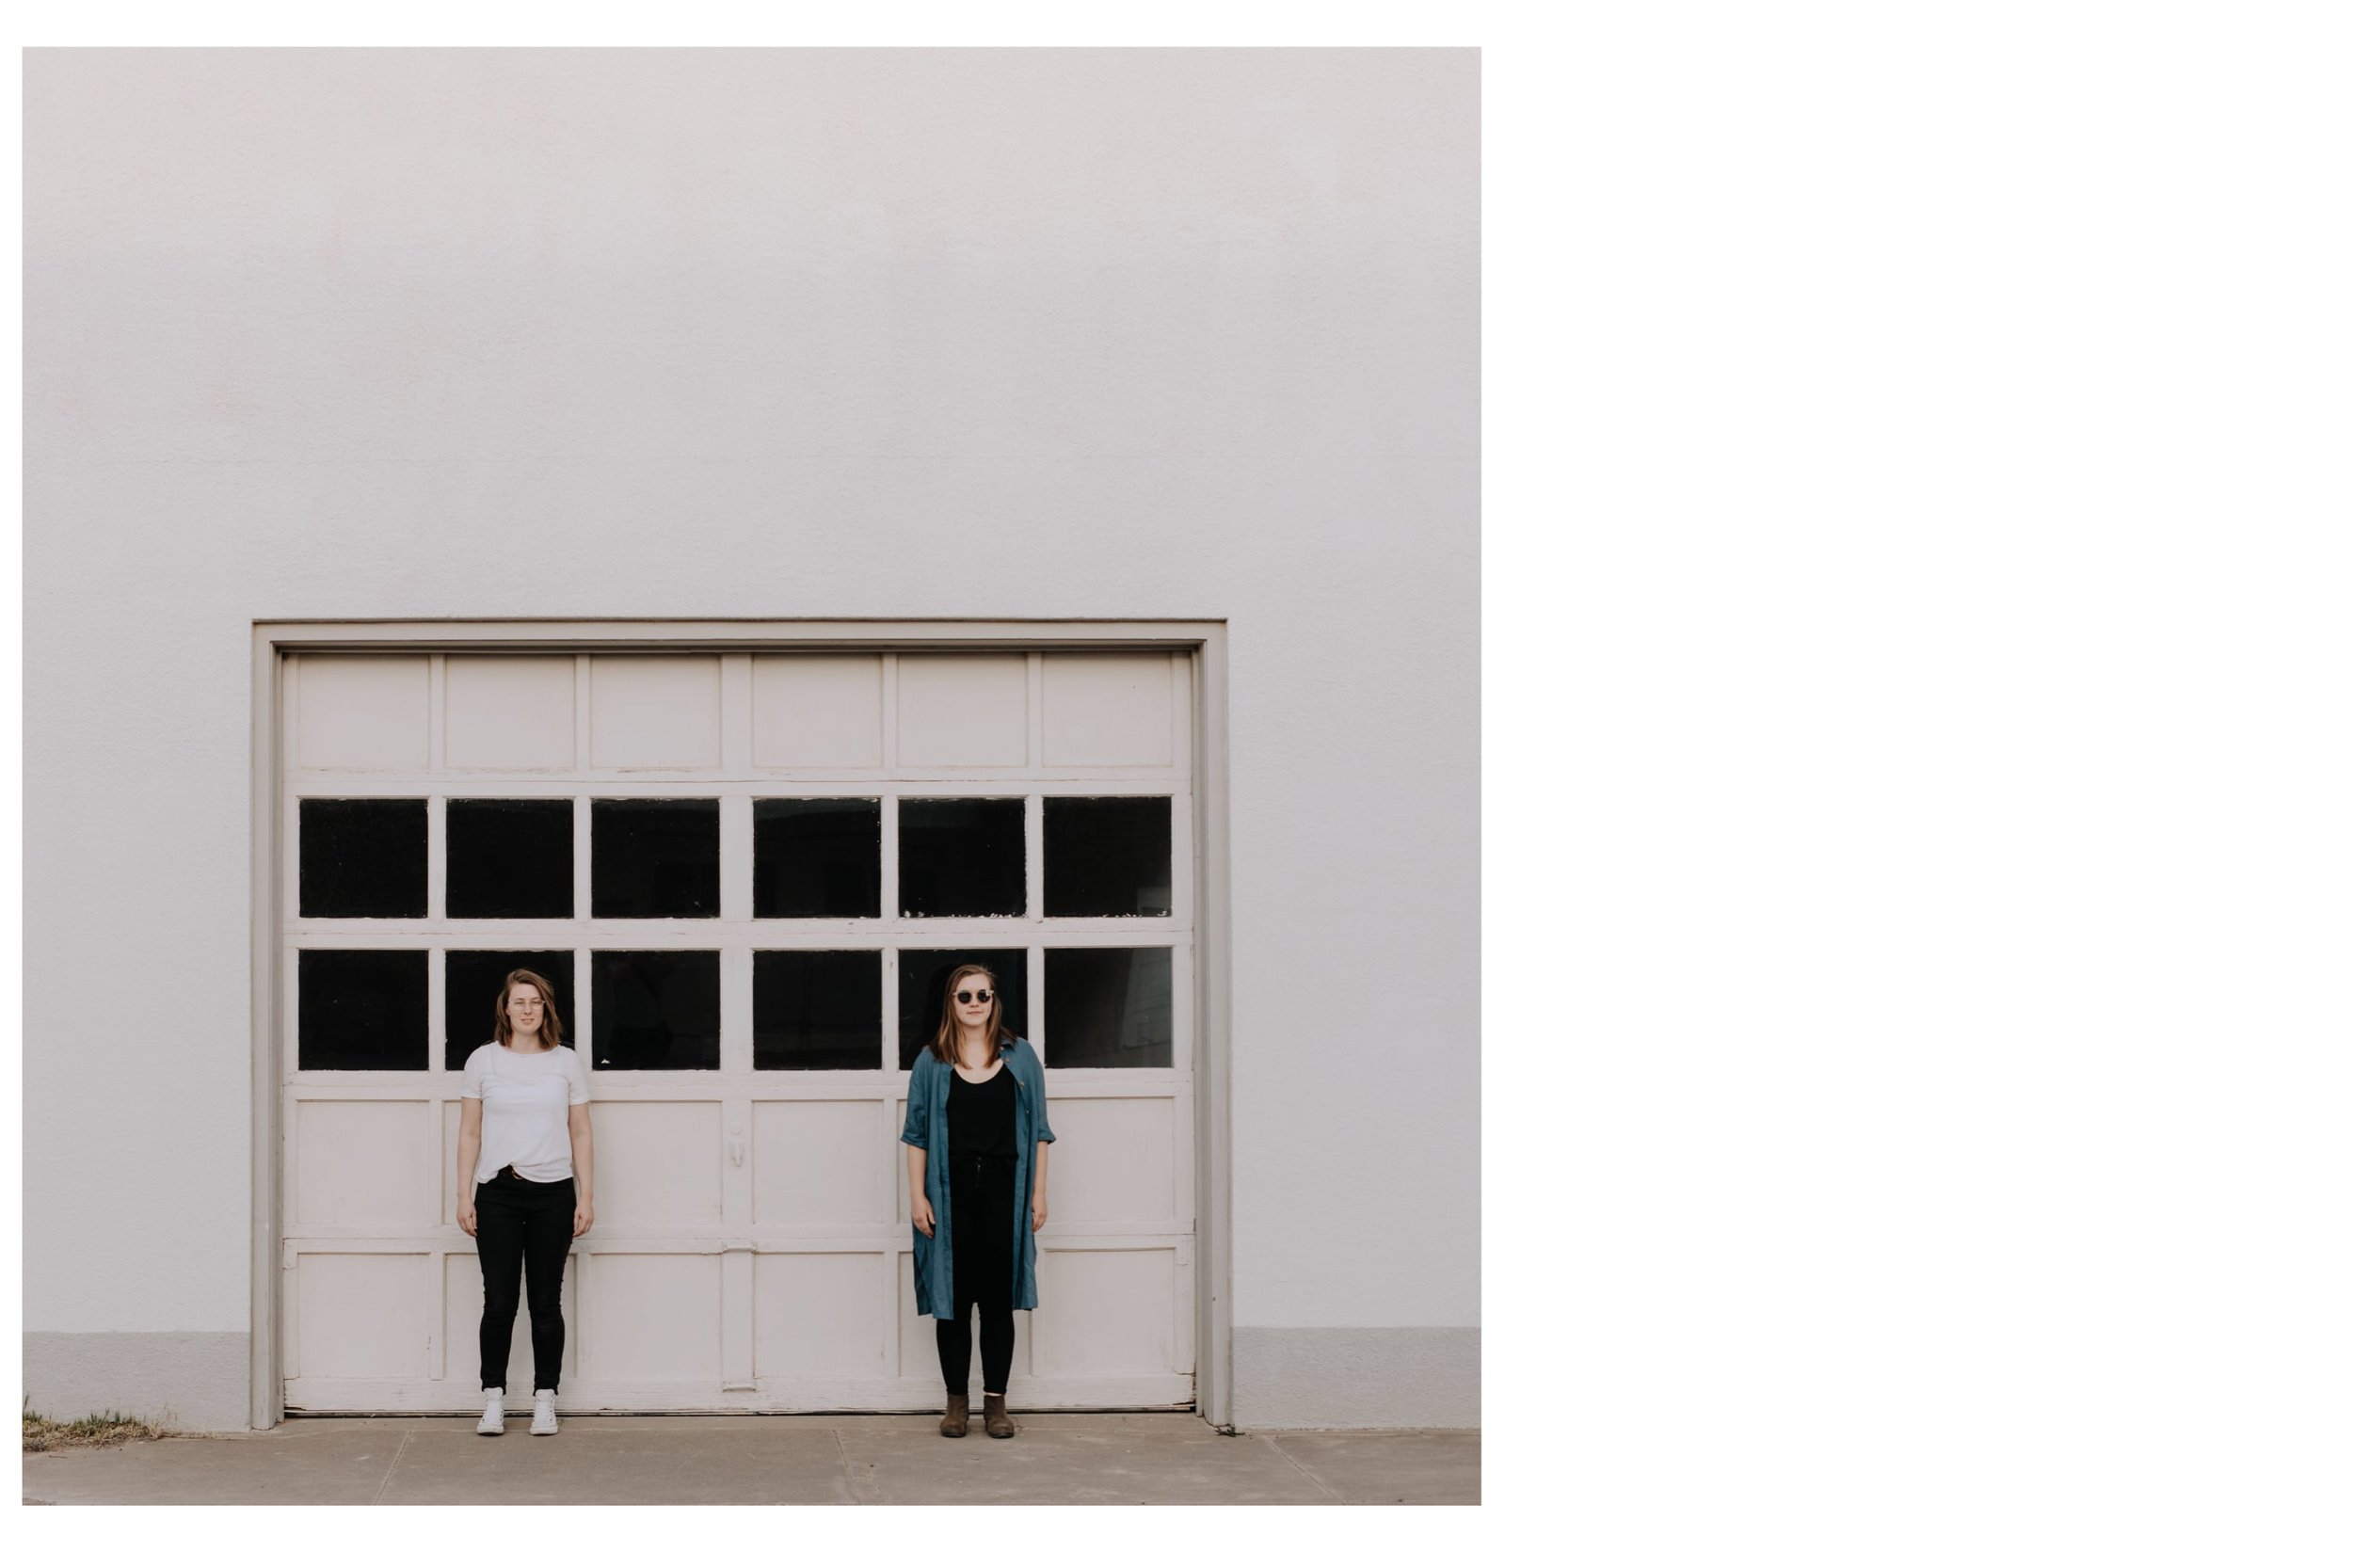 Two women stand in front of a white garage door during an edgy photoshoot in Marfa, Texas, with Josh Olson Photography.